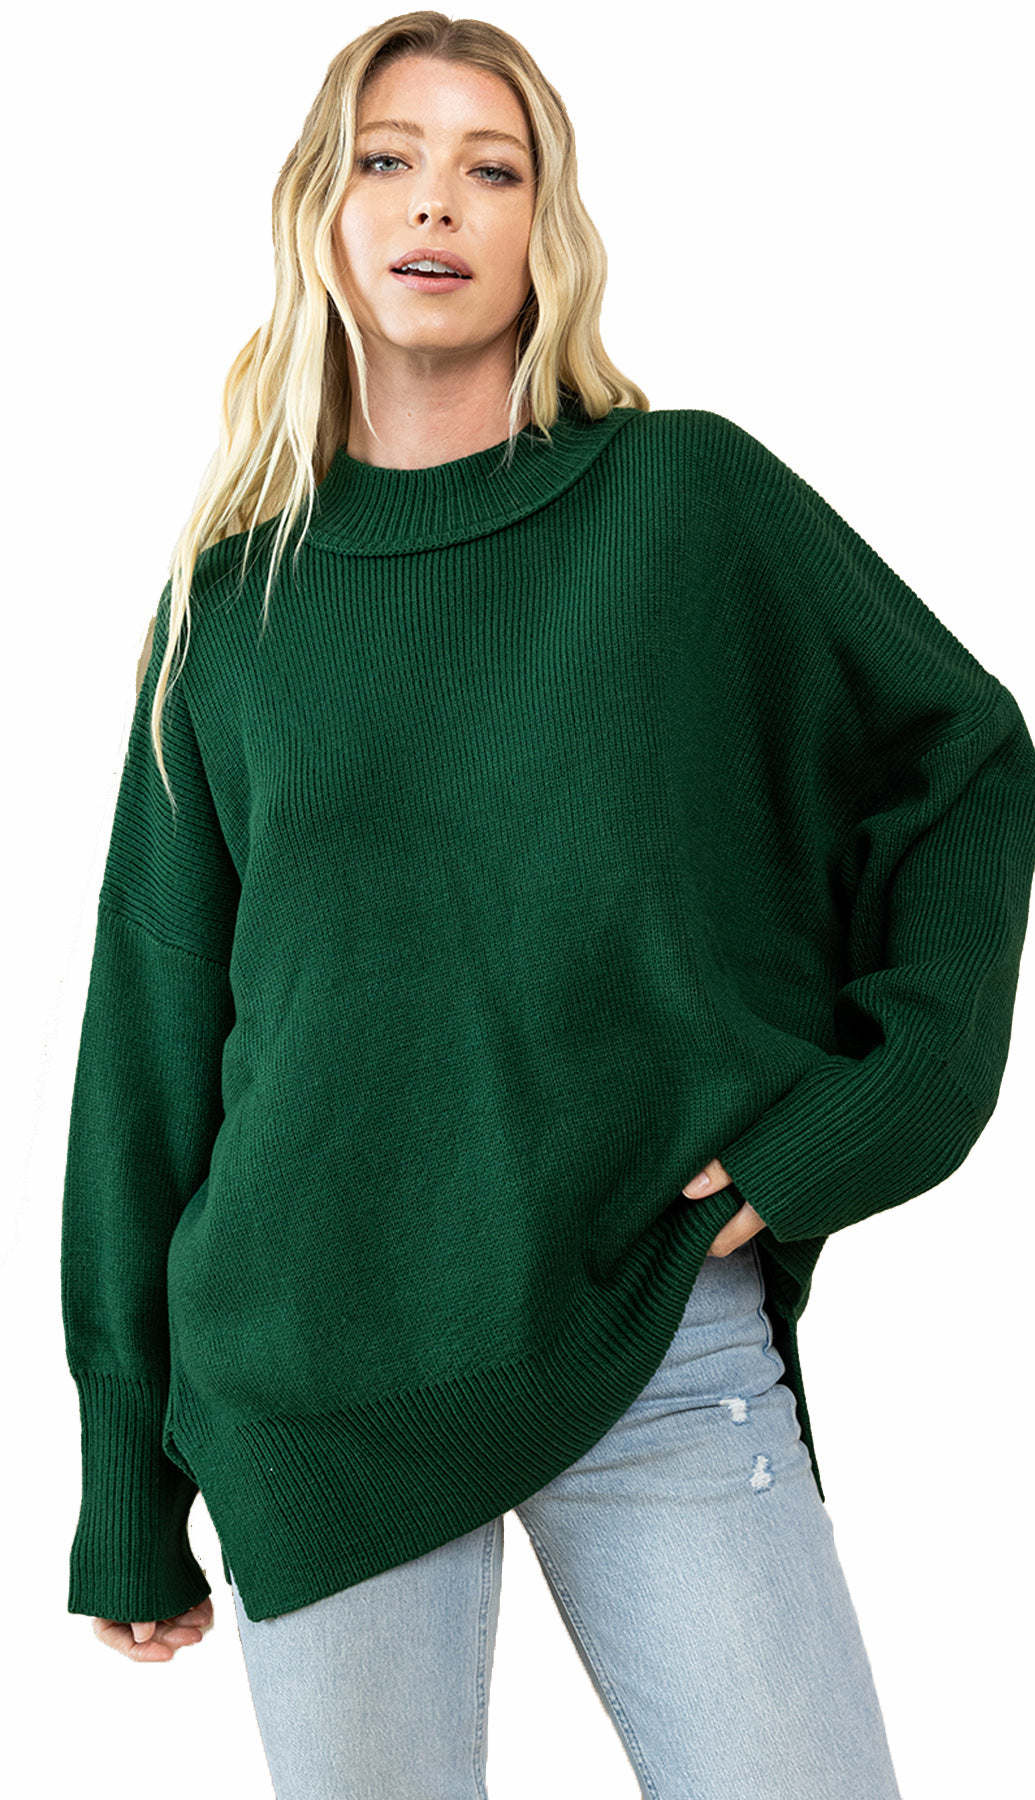  Other Stories wool roll neck oversized sweater in dark green